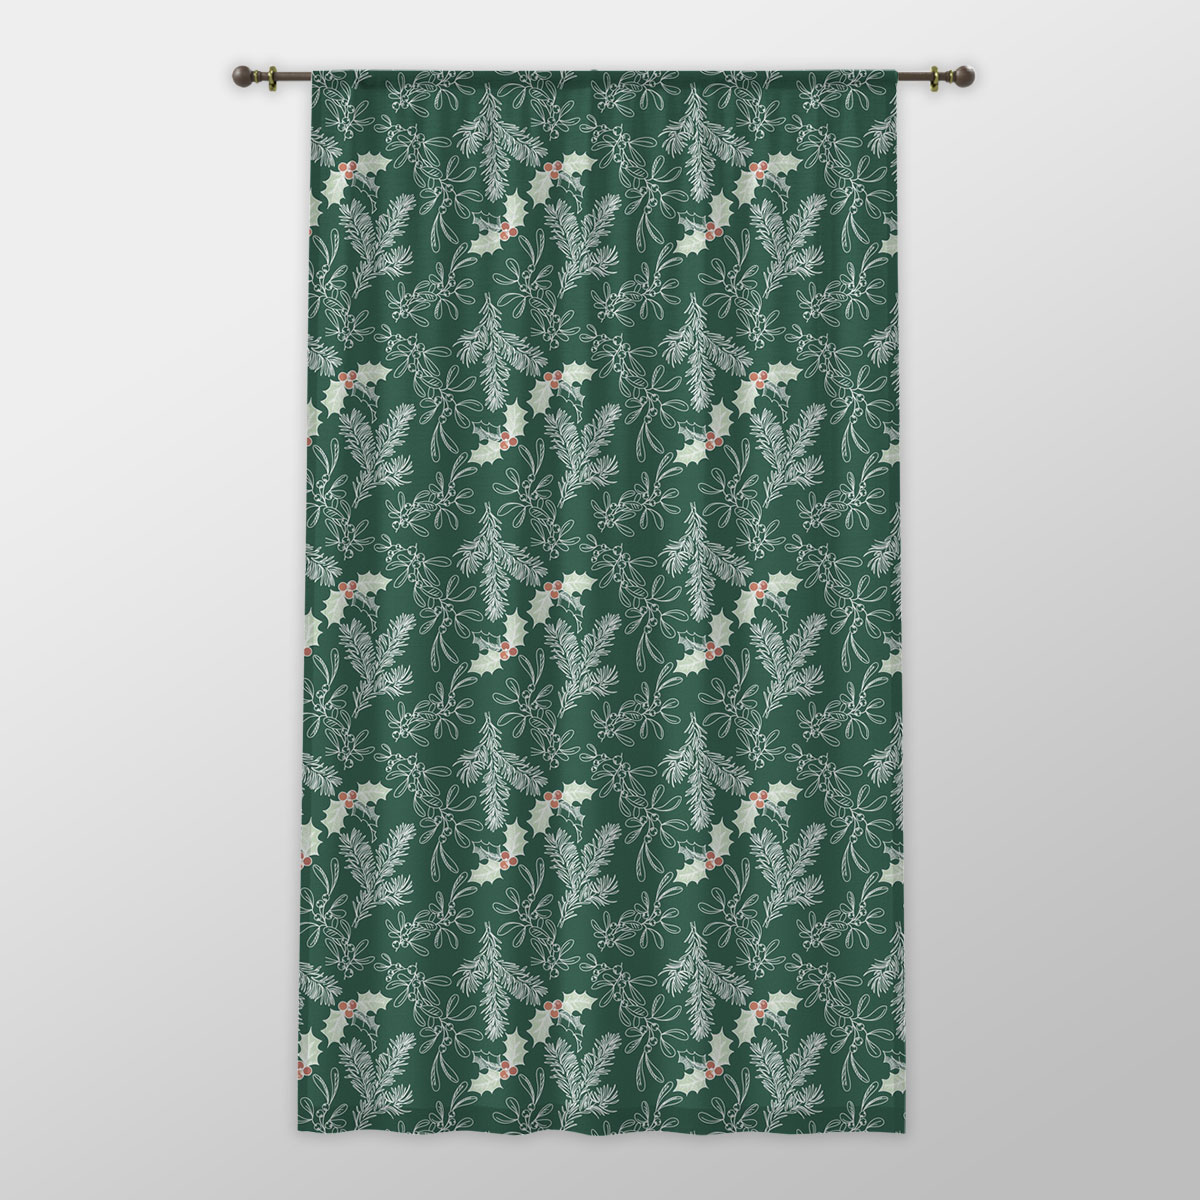 Holly Leaf, Christmas Mistletoe And Pine Tree Branche One-side Printed Window Curtain